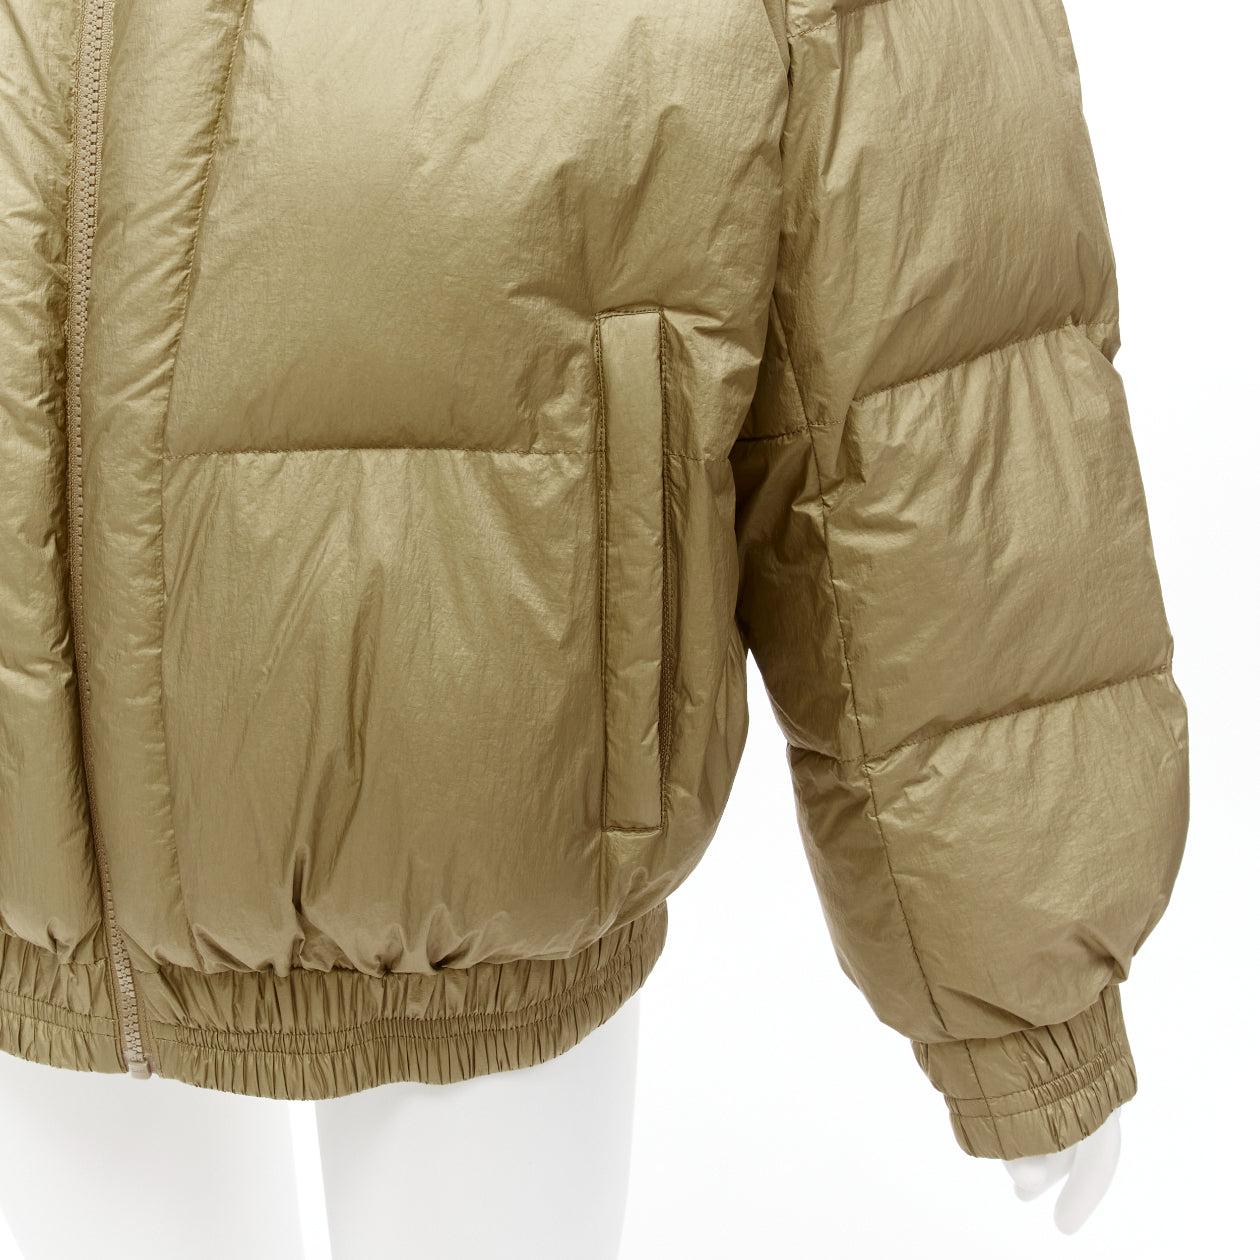 ISABEL MARANT ETOILE Kristen matte gold panelled padded puffer jacket FR38 M
Reference: CNLE/A00247
Brand: Isabel Marant
Collection: Etoile
Material: Polyamide
Color: Gold
Pattern: Solid
Closure: Zip
Lining: Gold Polyester
Extra Details: Front zip.